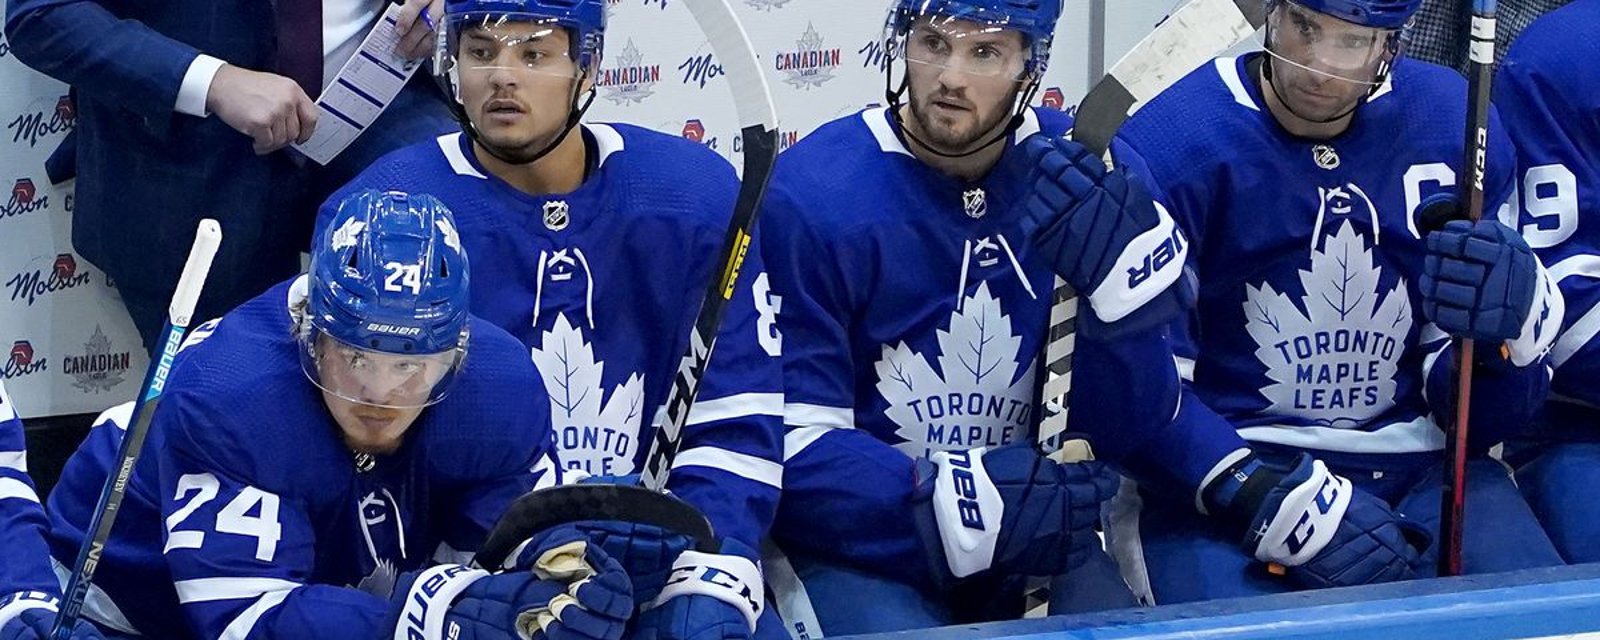 NHL rules in the bubble is screwing things up for the Leafs! 